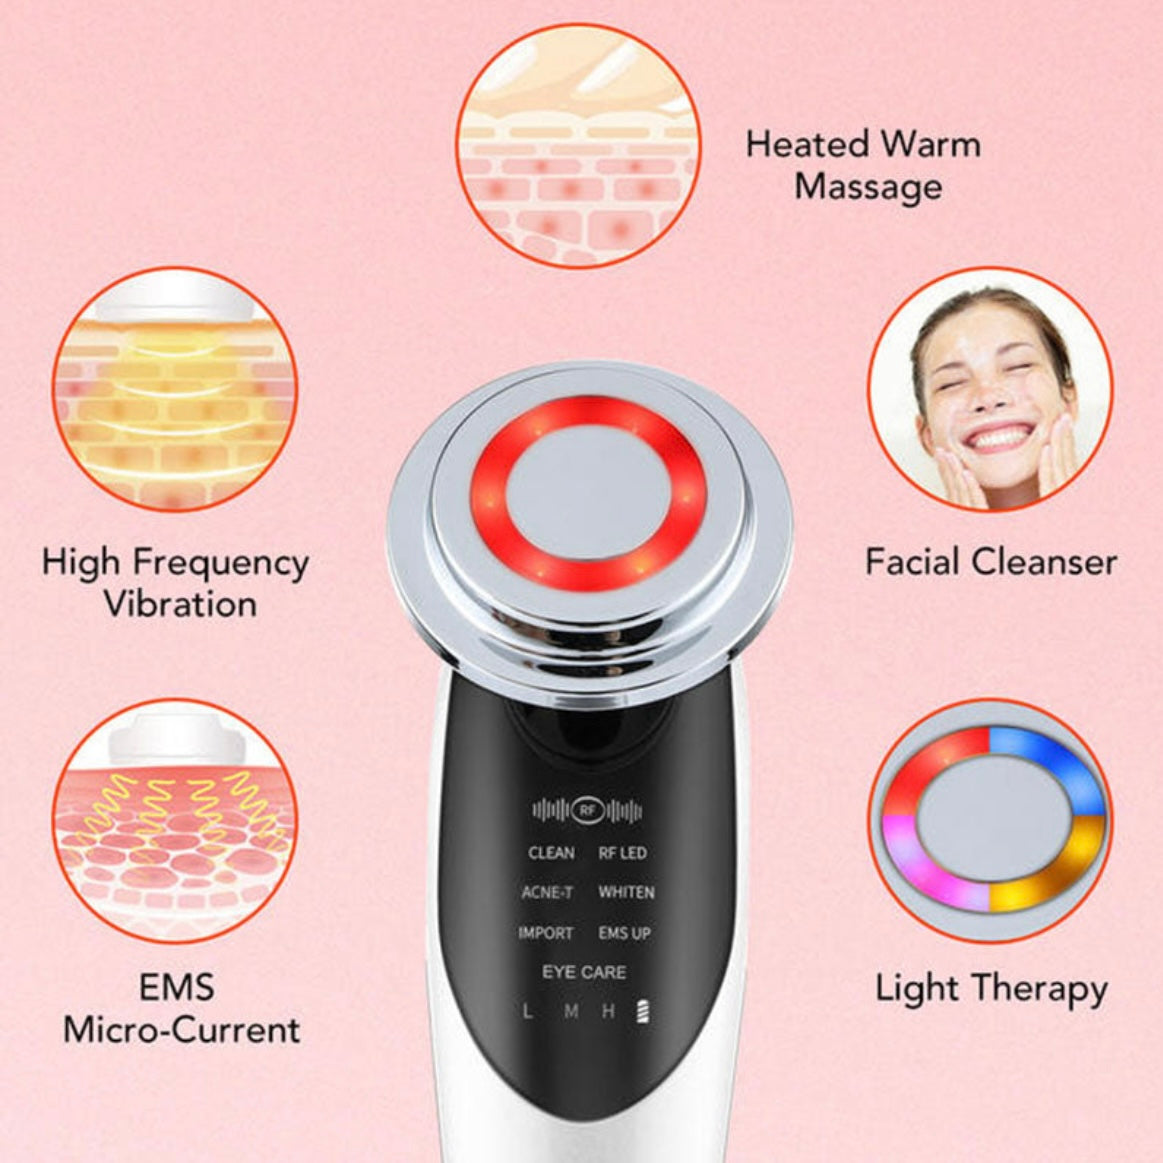 7 in 1 Anti - Aging Face Lift Device